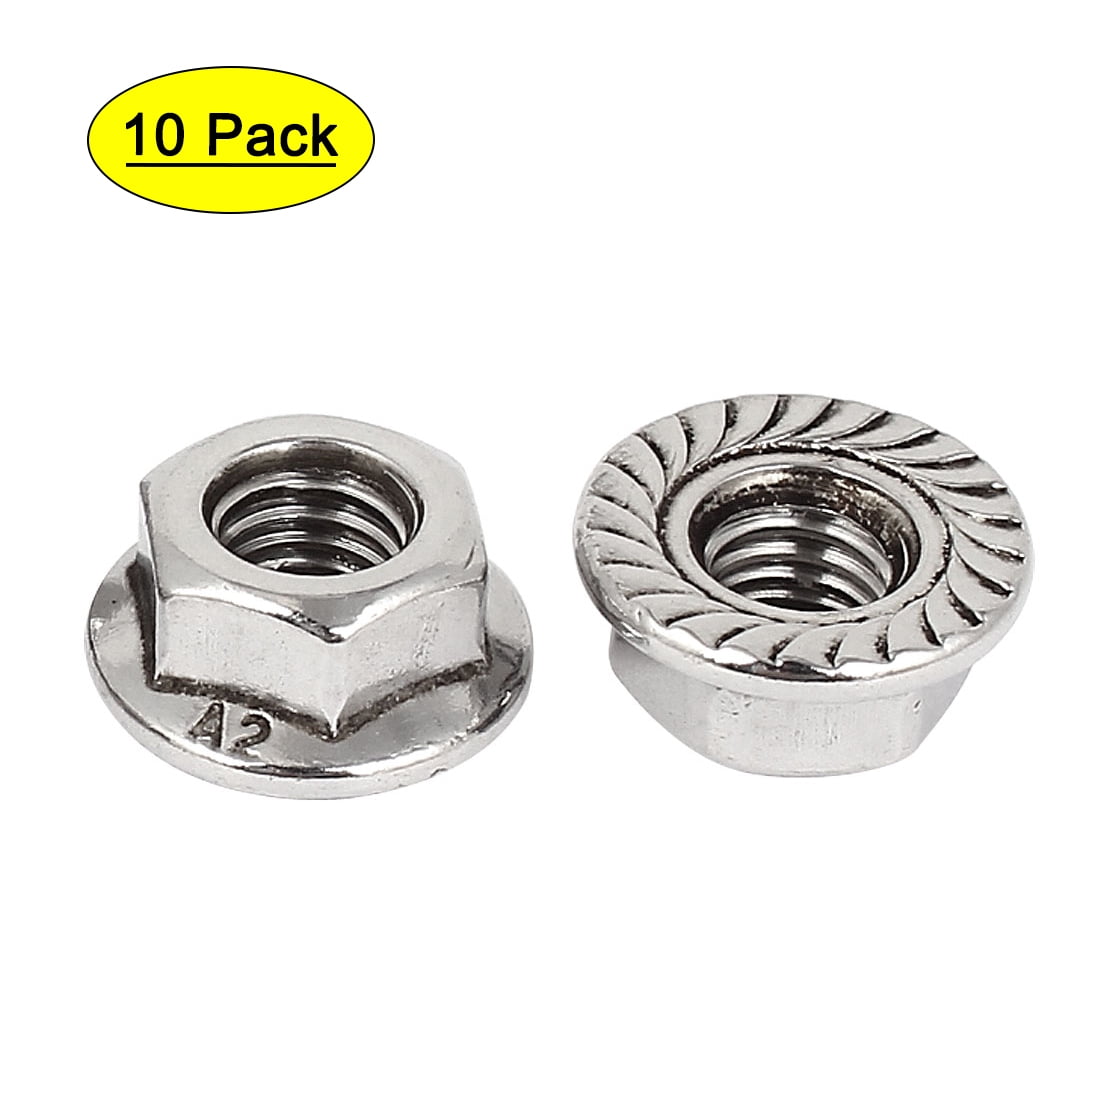 UNC 1/4-20 5/16-18 3/8-16 1/2-13 Hex Serrated Flange Nuts Lock Nuts A2 Stainless 